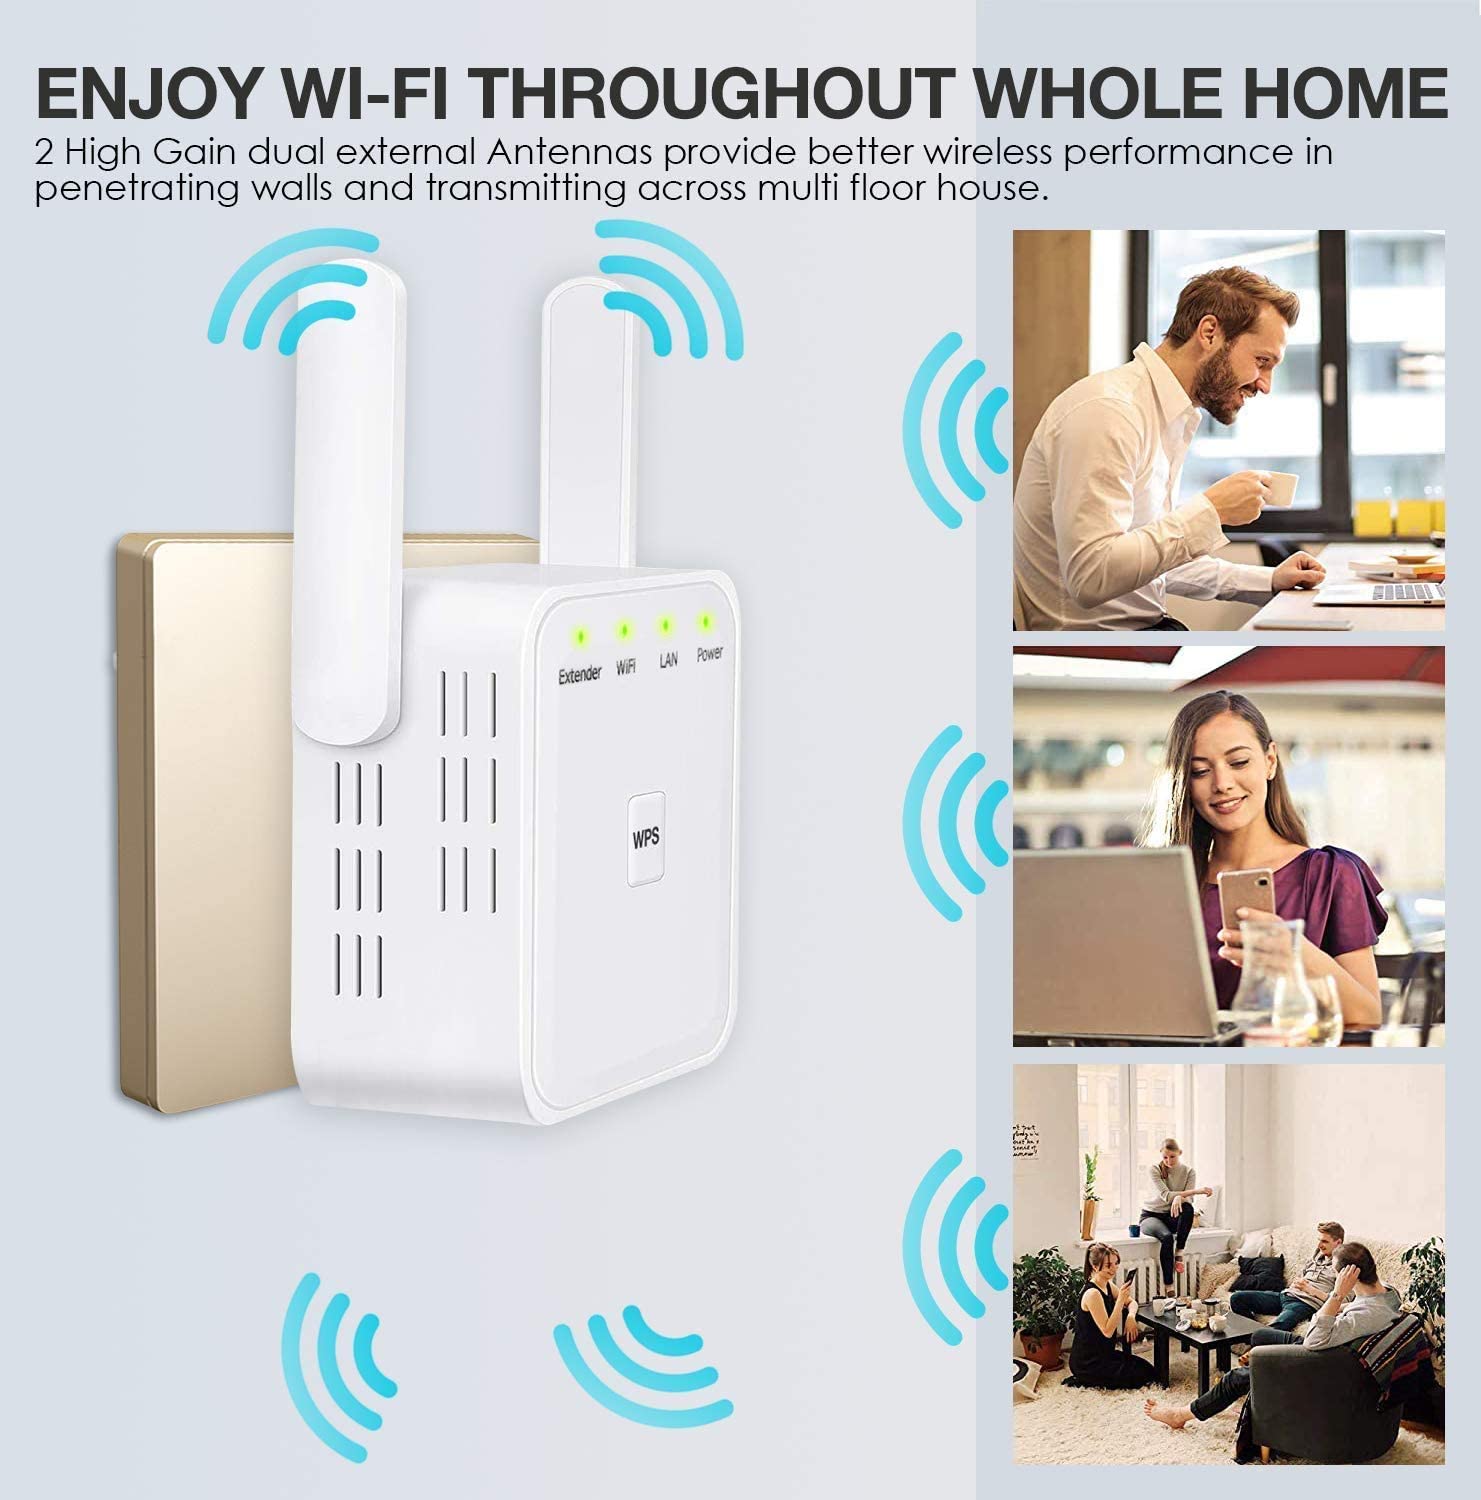 WIKIMN WiFi Signal Extender, Internet WiFi Booster 2.4G for Home 300Mbps Superboost Wi-Fi Blast Range WLAN Signal Amplifier Repetidor Supports RP/AP Mode, Easy Setup WP Smart Home